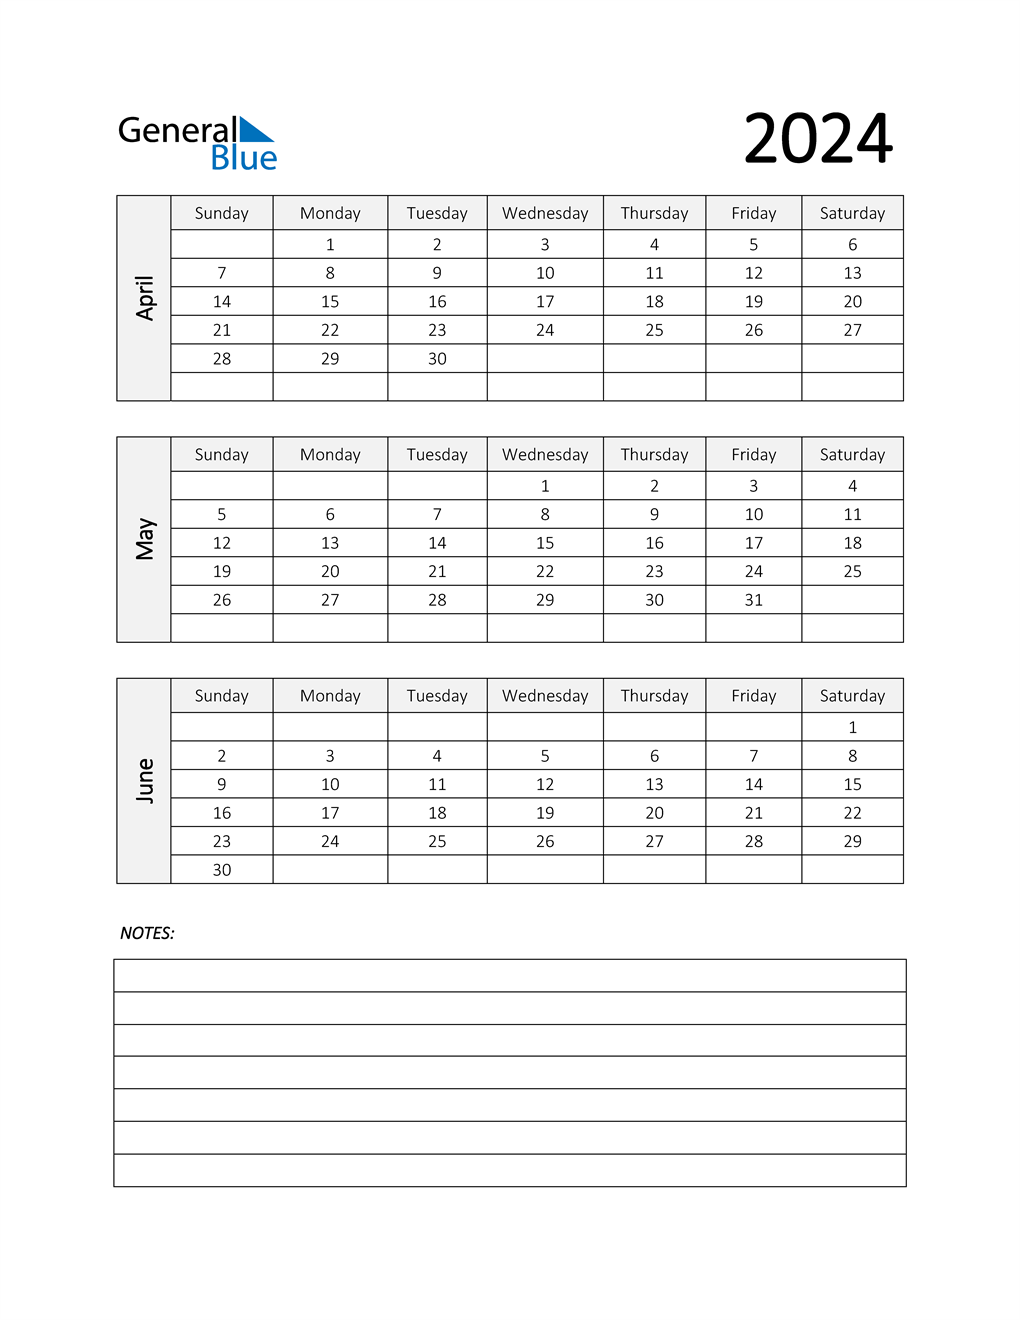  Q2 2024 Calendar with Notes